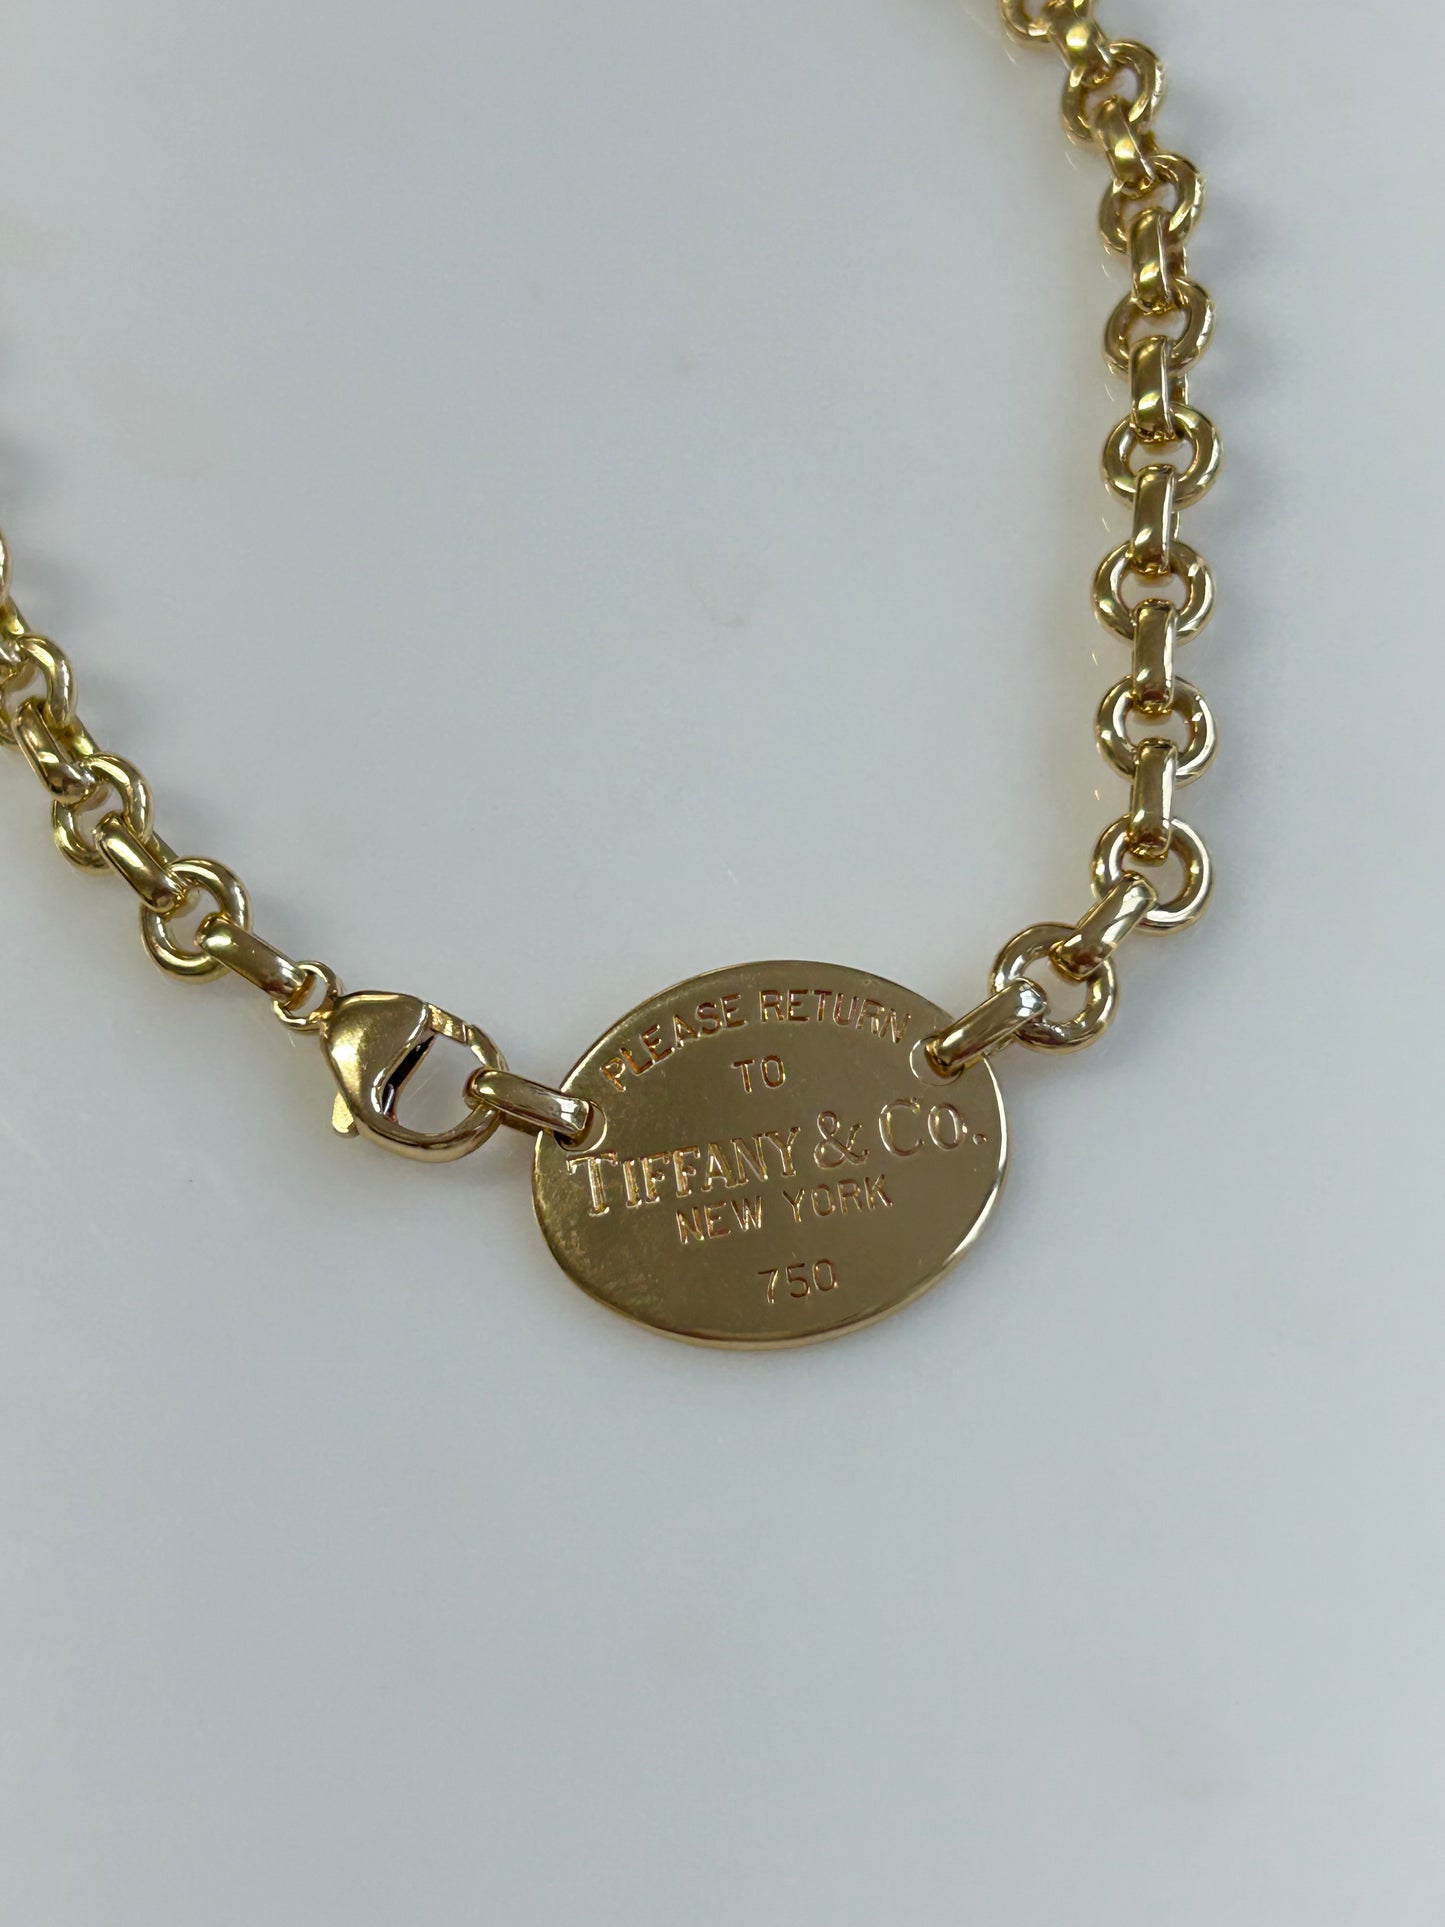 18ct Tiffany & Co necklace